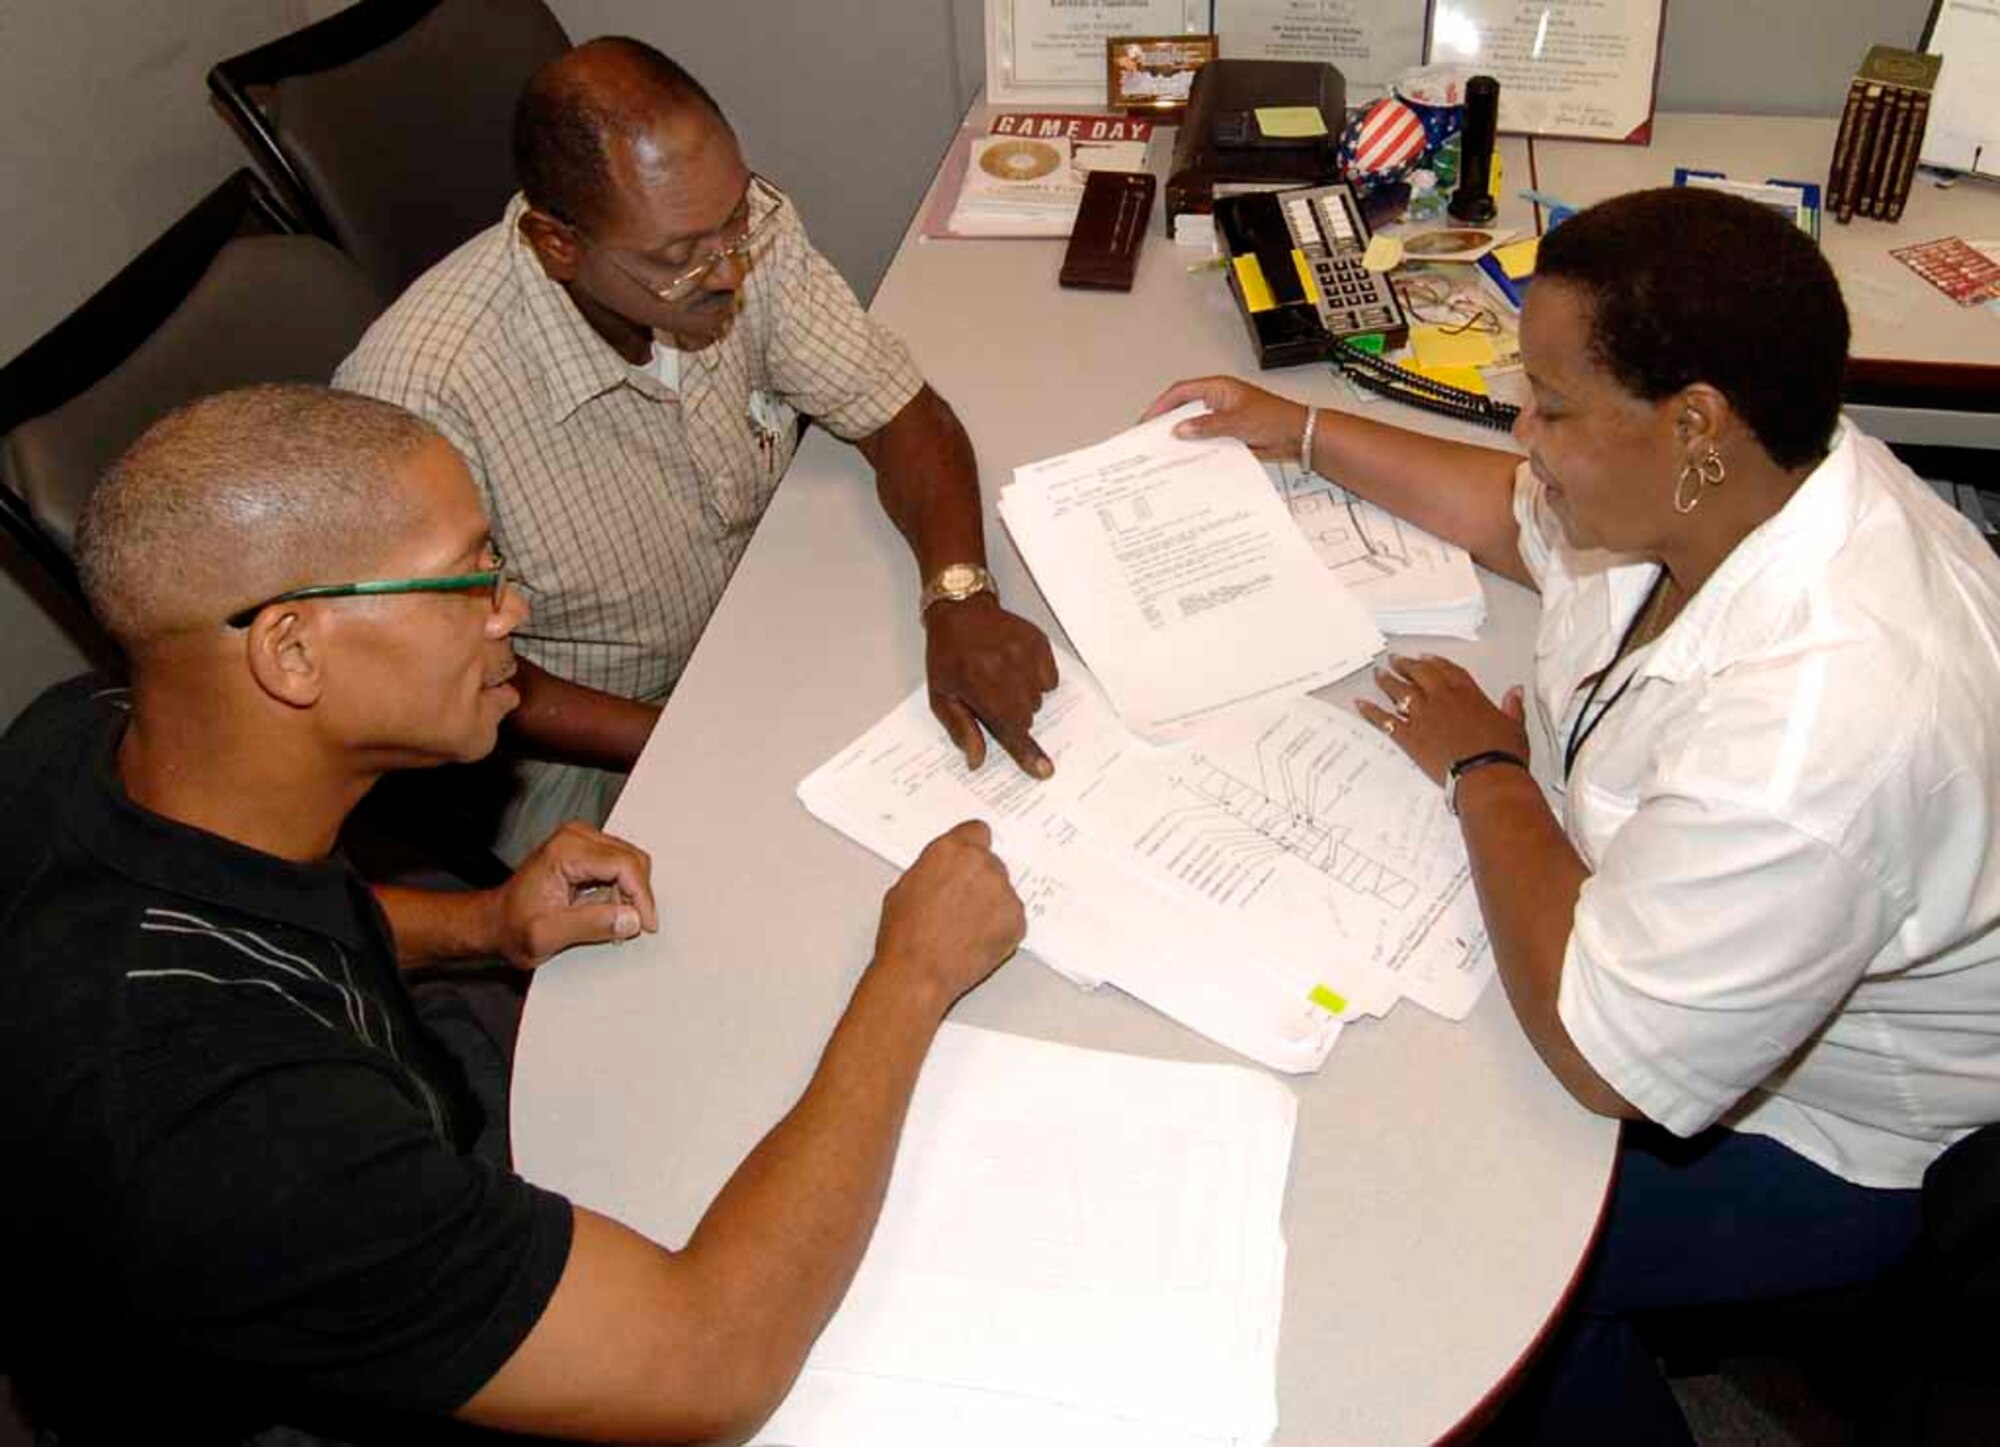 From left: TO Manager Cornelious Barnett, TO Equipment Specialist Ira Hodge, and TO Writer/Editor Sylvia Buckner meet to review a modified TO and ensure all requested changes were incorporated into the new document. (Air Force photo by Kirk McPheeters)